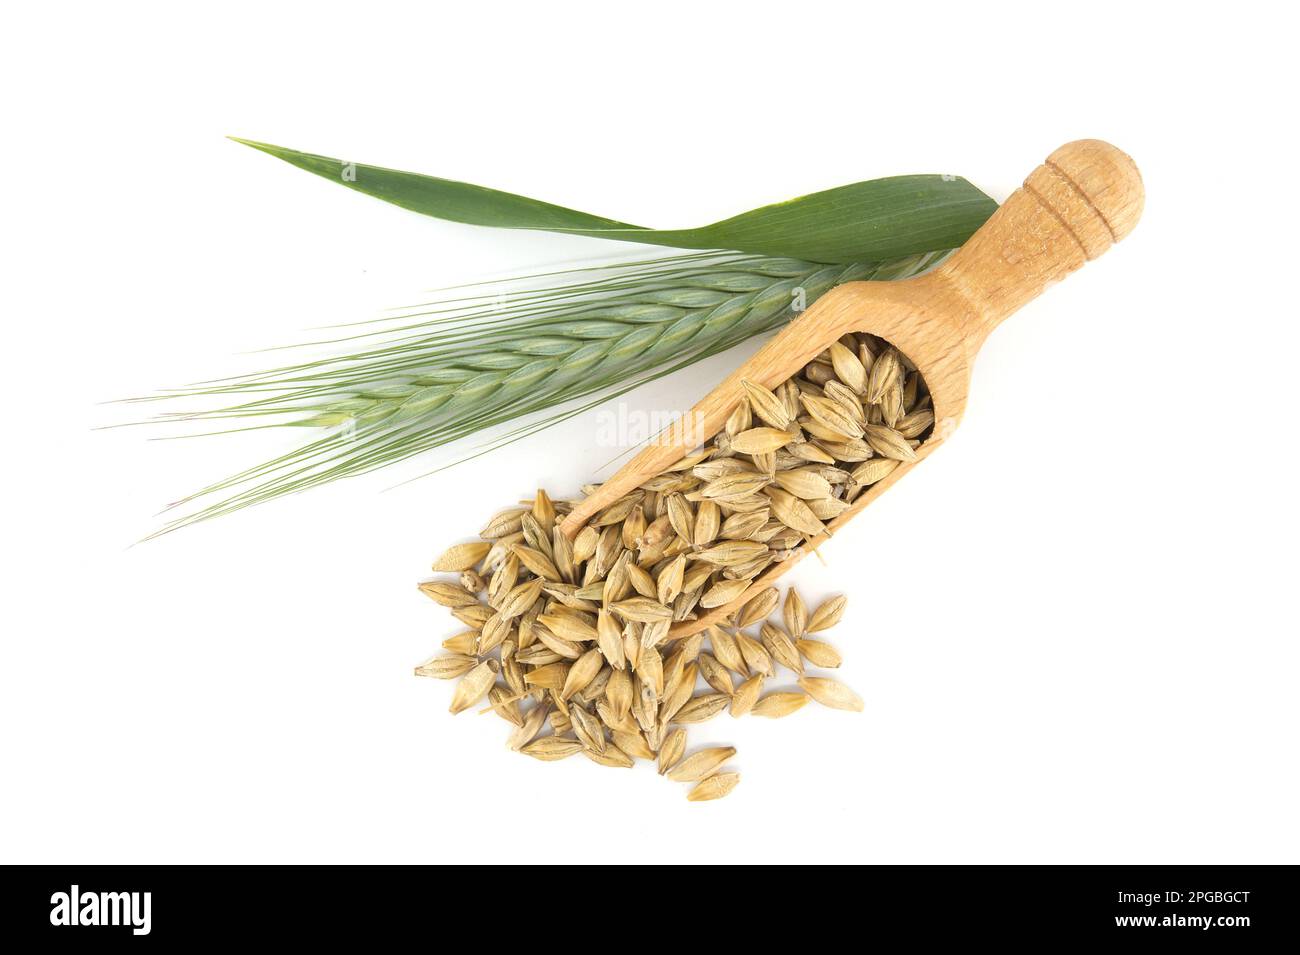 Barley grain seeds (Hordeum vulgare) spilling from wooden scoop near to barley ears over white background Stock Photo